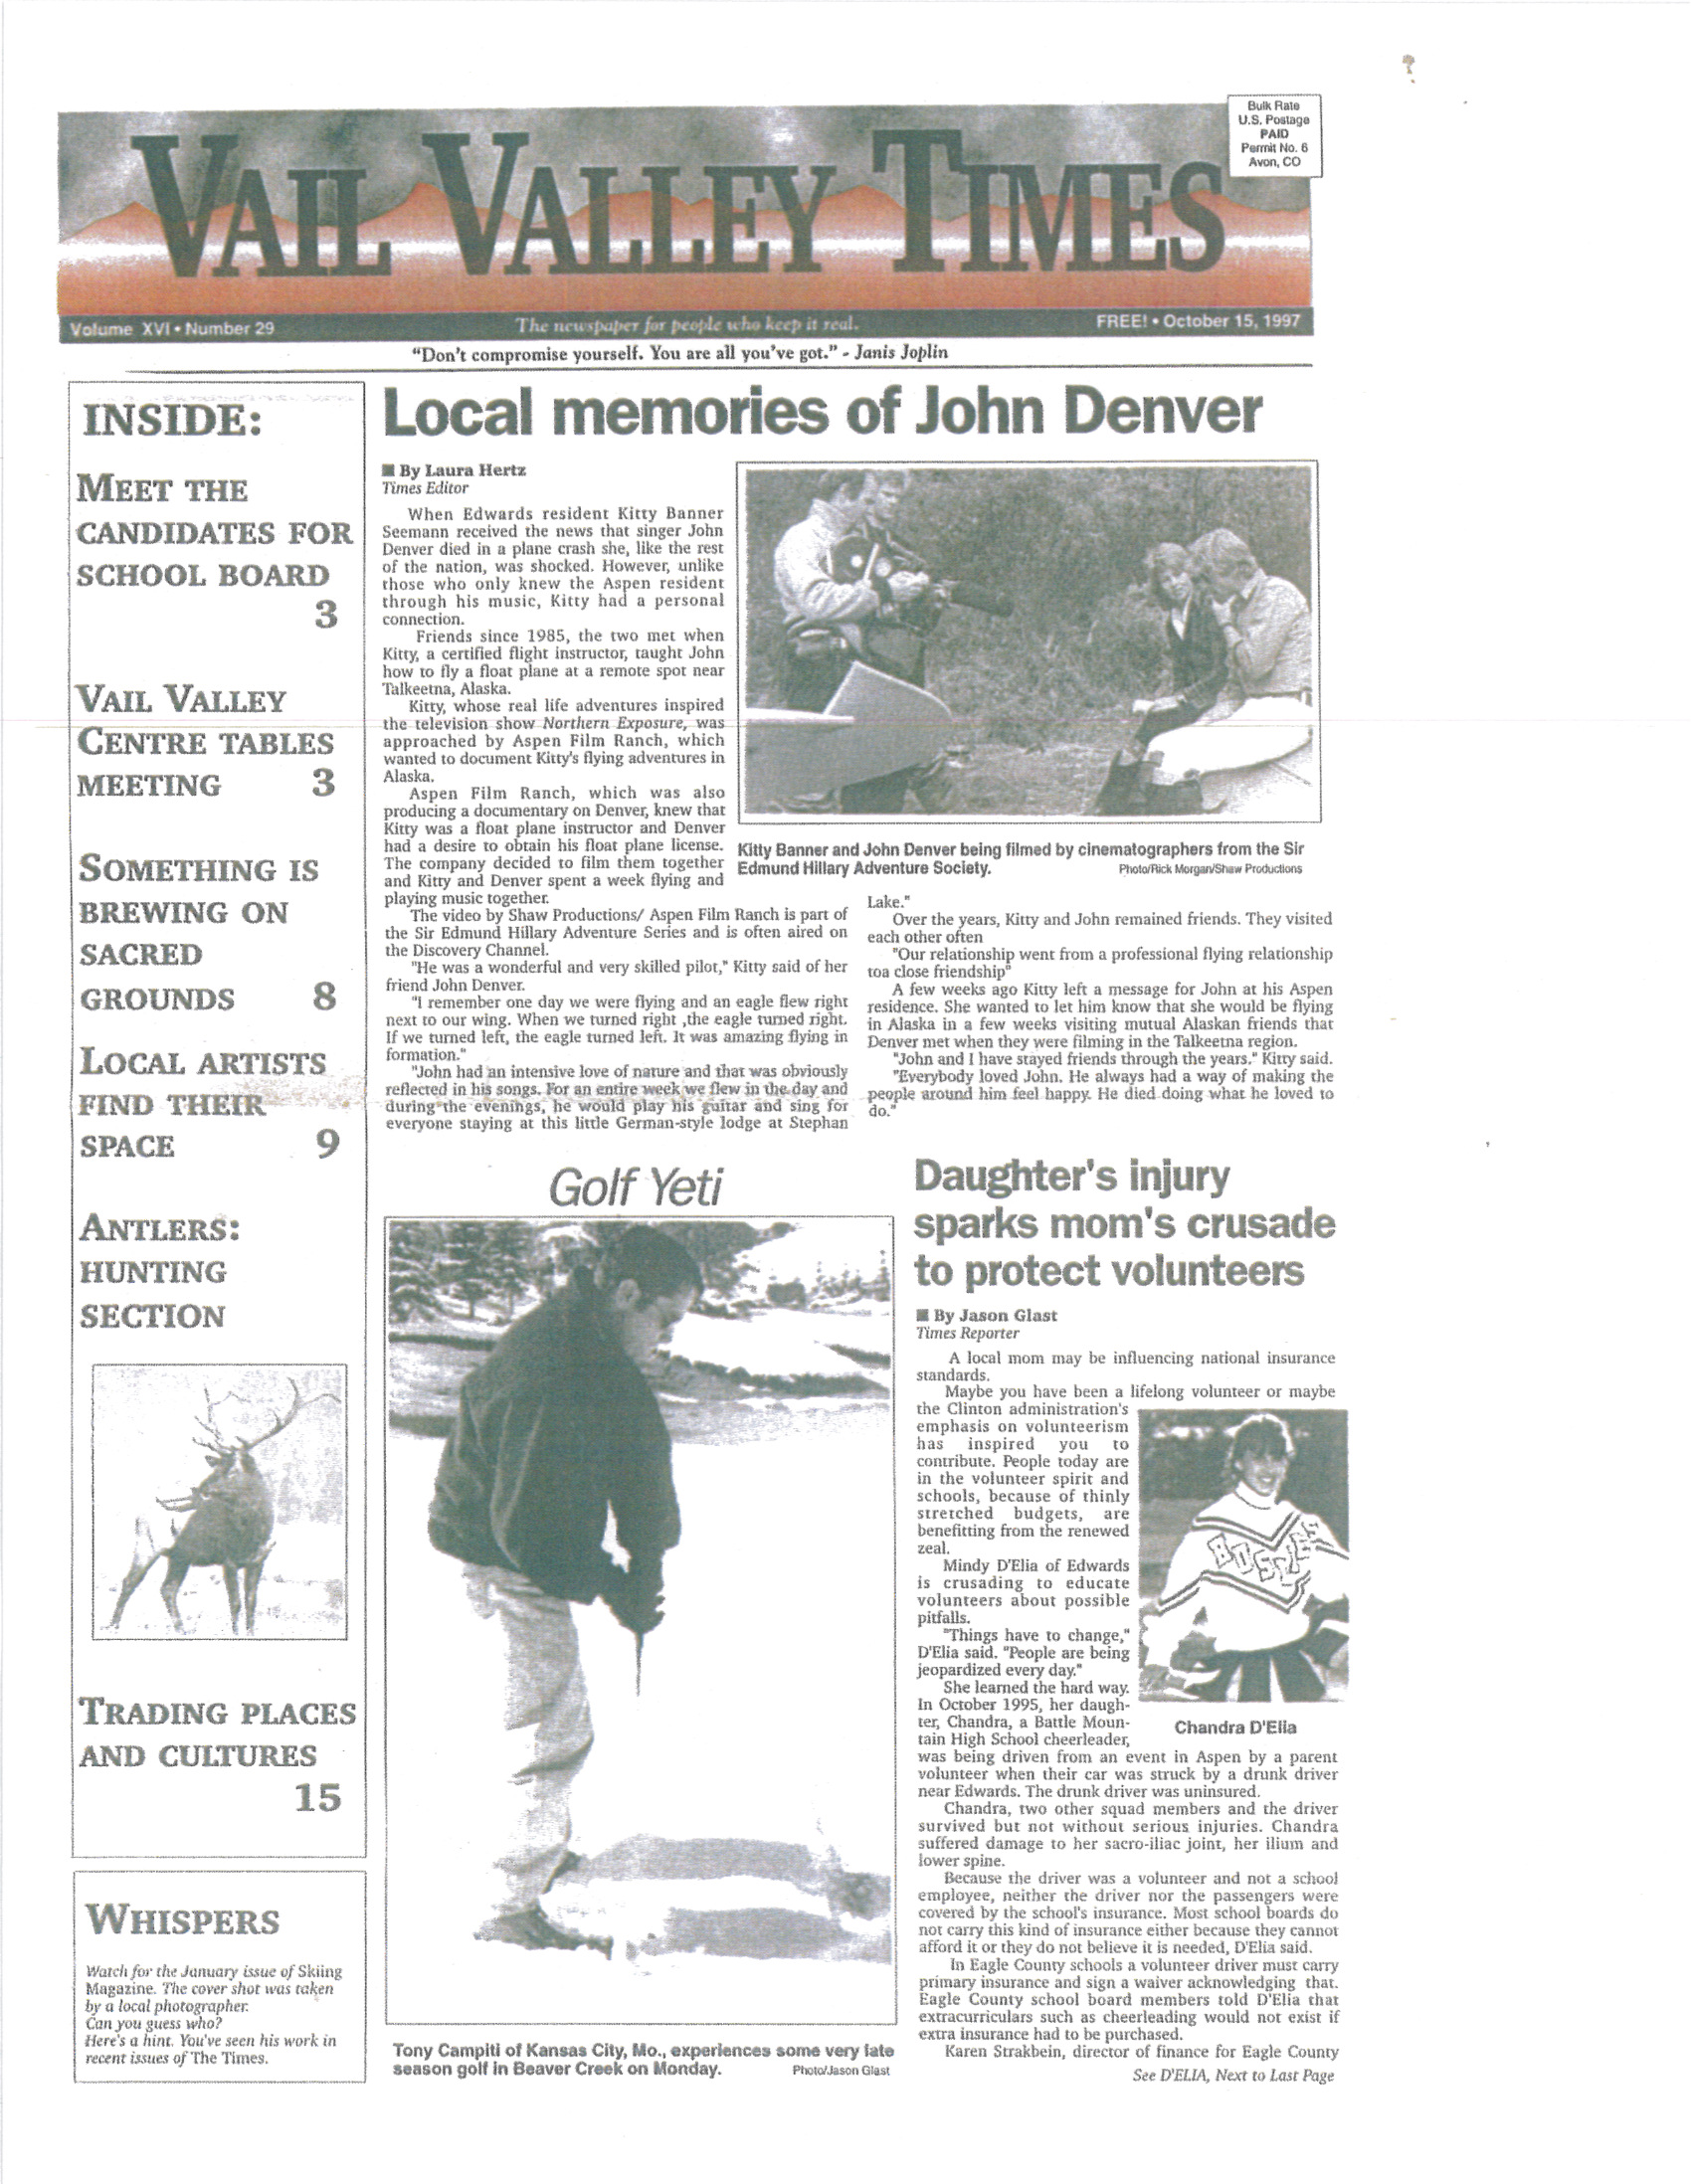 1997 - Vail Valley Times_Page_1.jpg